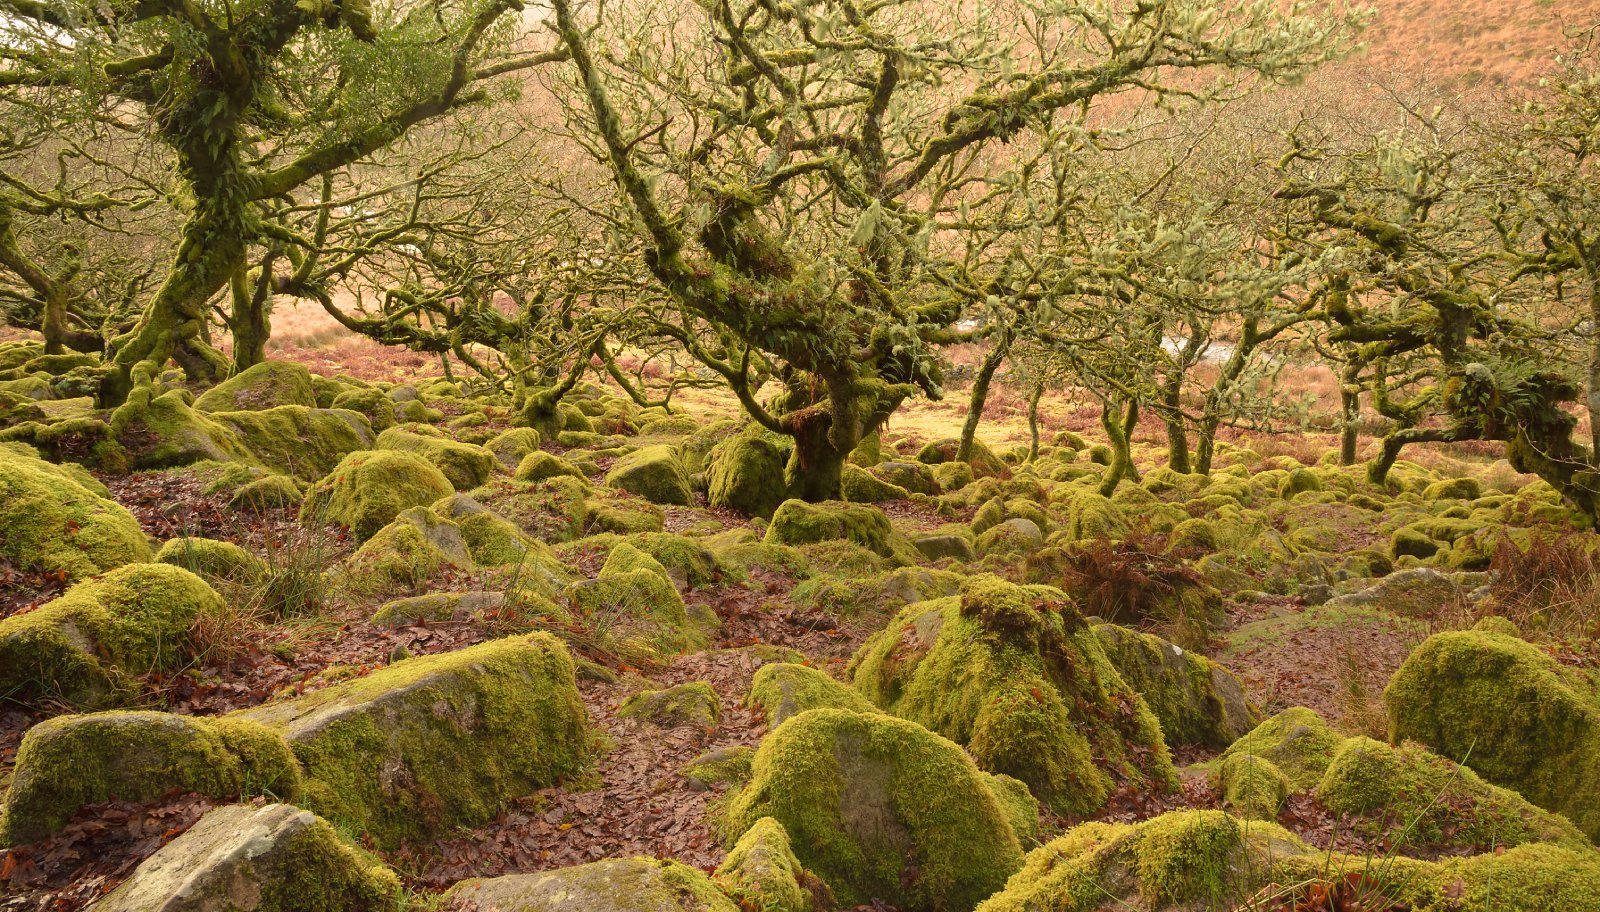 Image Credit: Shutterstock / Mark Barnwell <p>Wistman’s Wood, with its twisted oaks and mossy boulders, is like a scene from a fantasy novel. However, Dartmoor’s mists can descend quickly, making navigation tricky.</p>